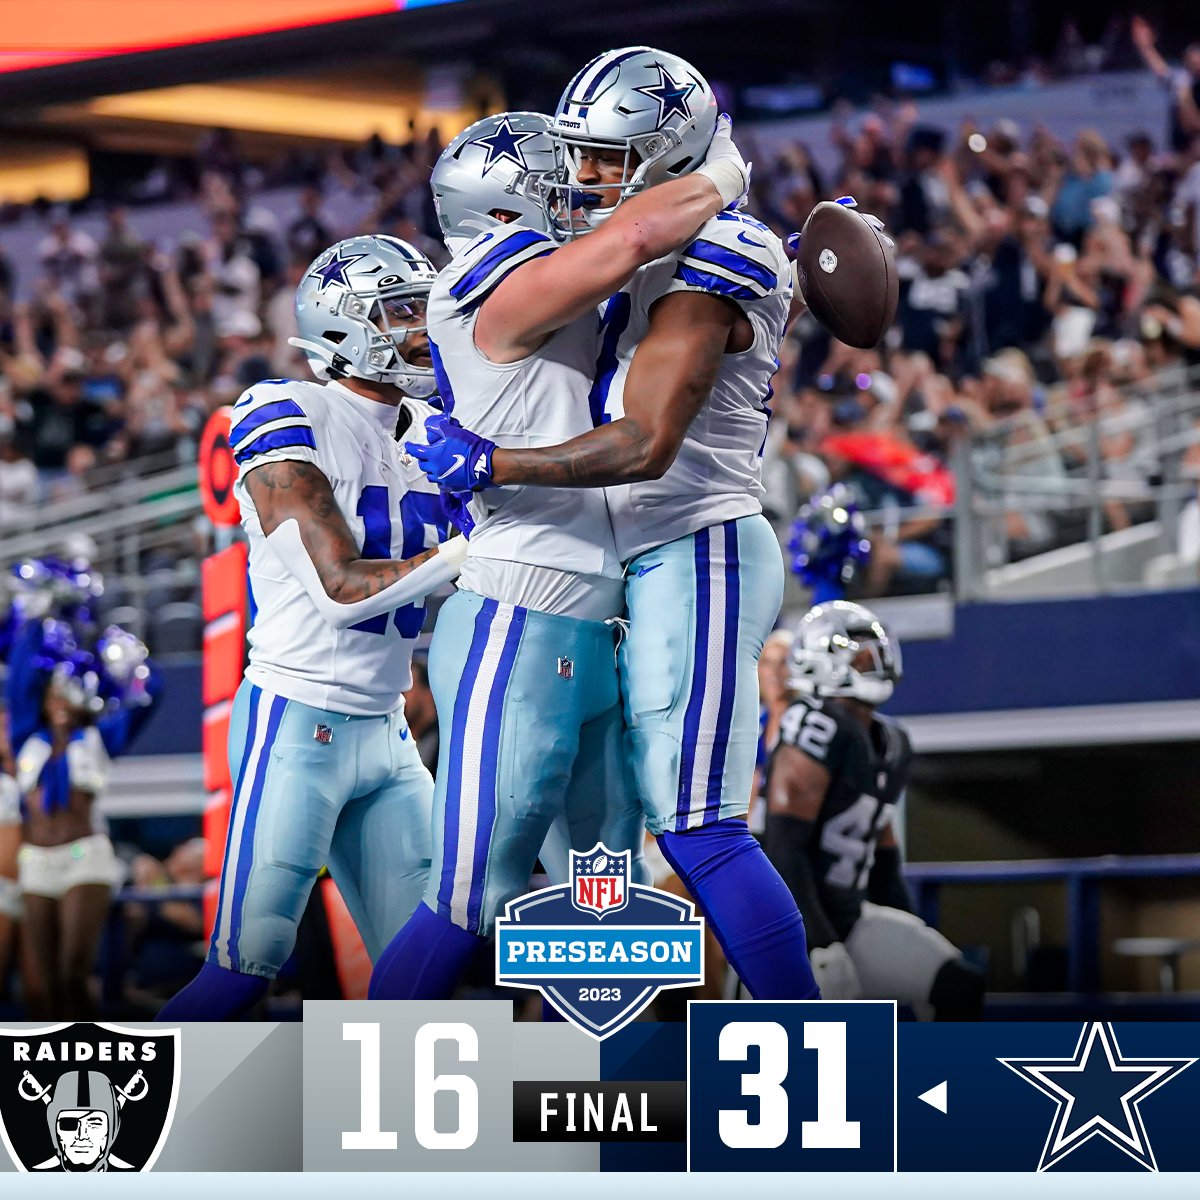 FINAL: A big performance from @willgrier_ gives the @dallascowboys the win. #LVvsDAL